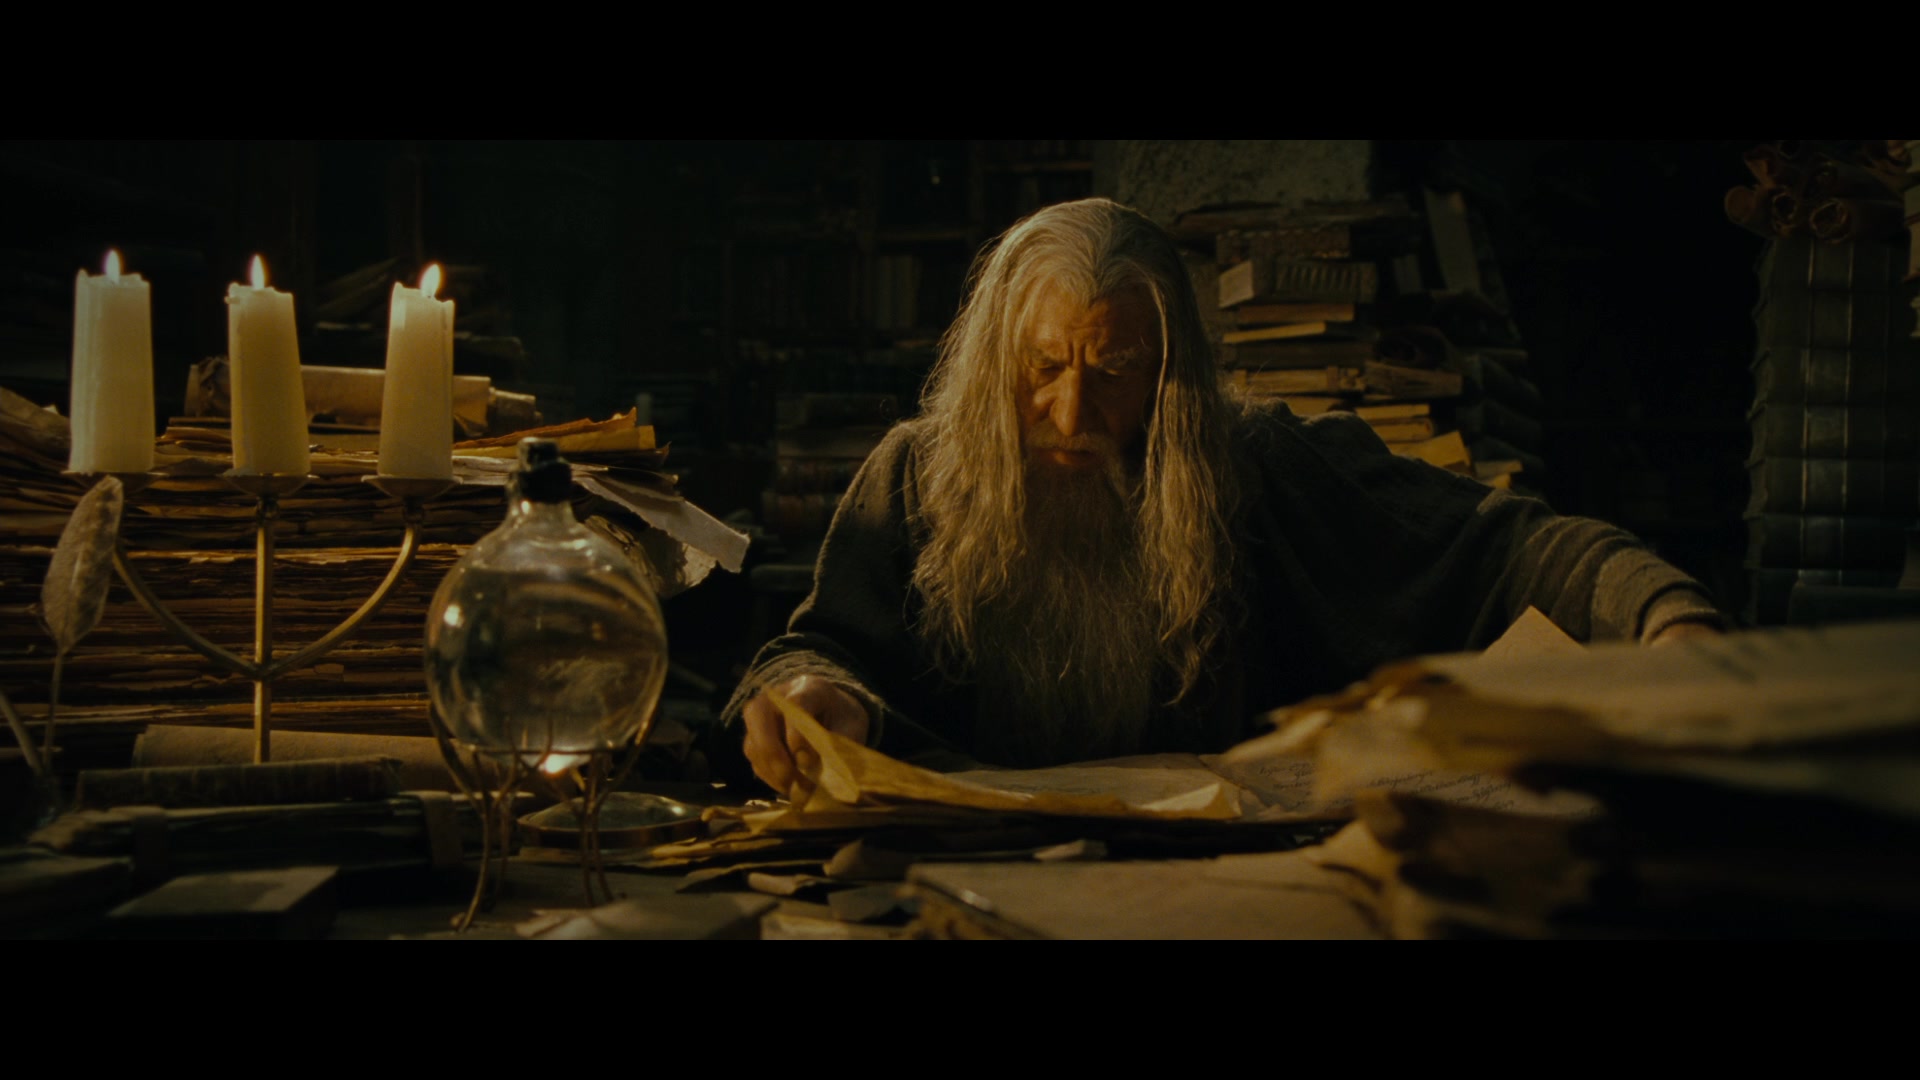 Gandalf (Sir Ian McKellen) researches the true nature of the One Ring in The Lord of the Rings: The Fellowship of the Ring (2001), New Line Cinema